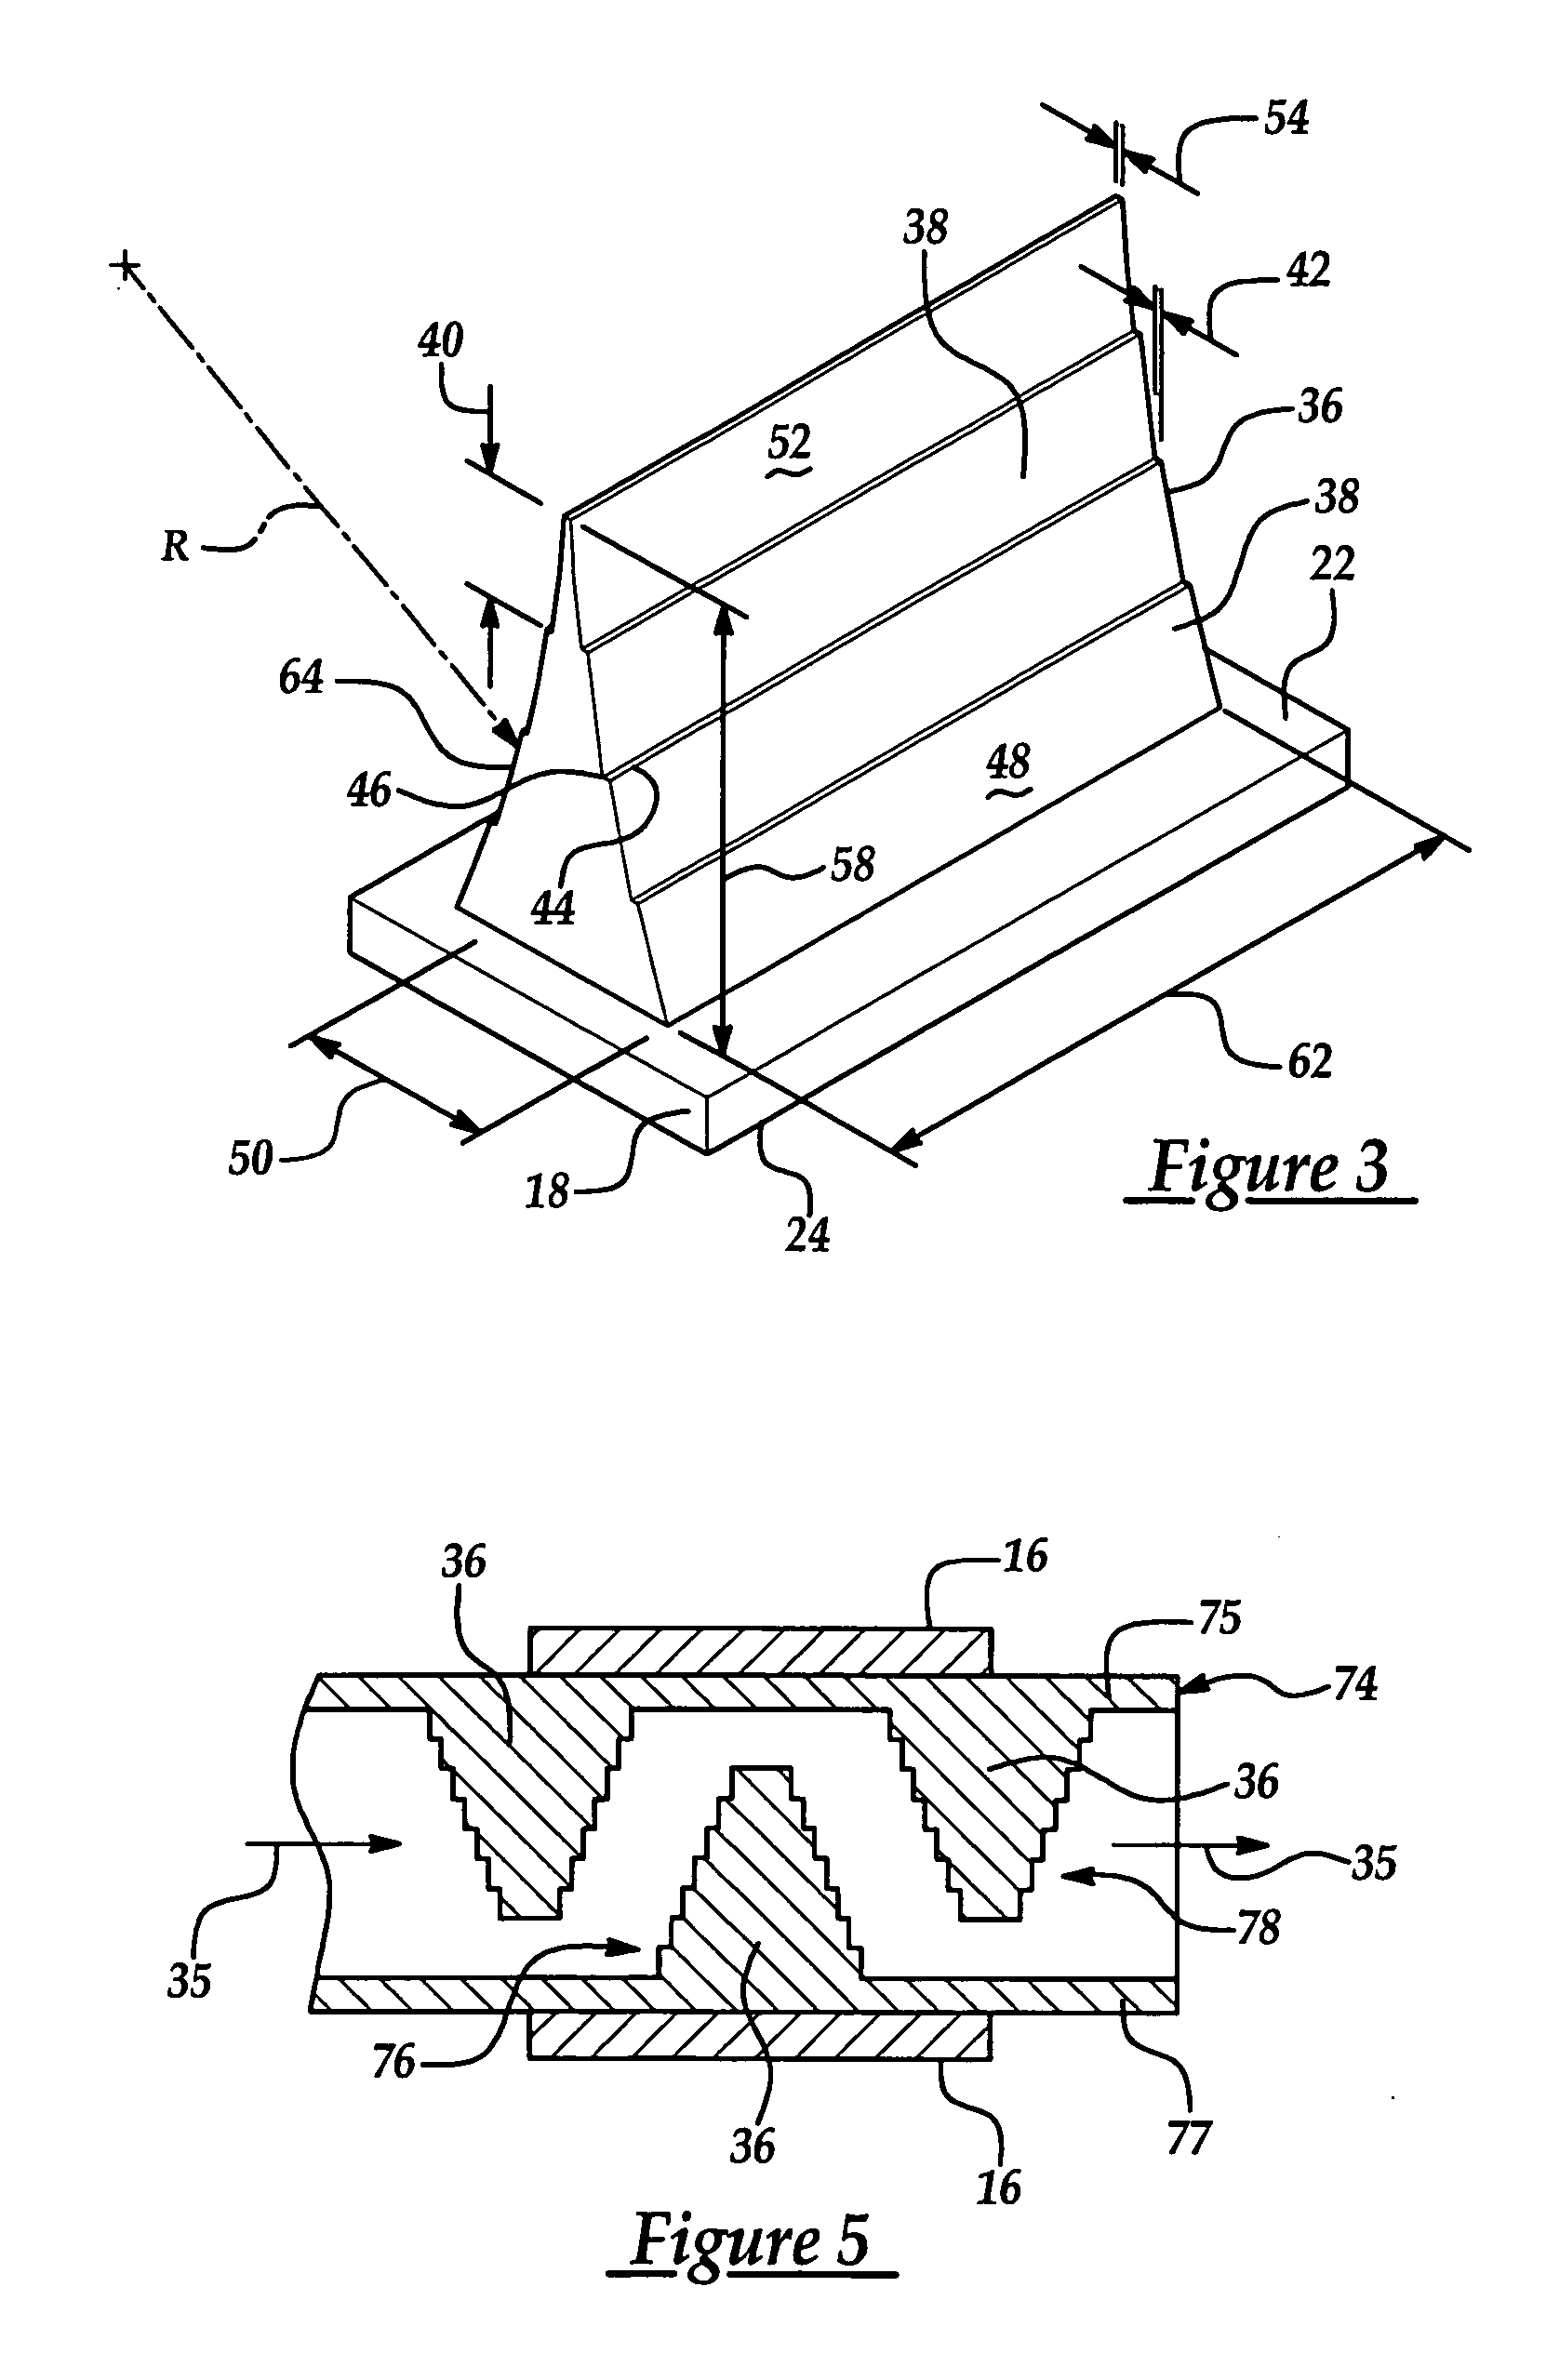 Heat dissipation element for cooling electronic devices